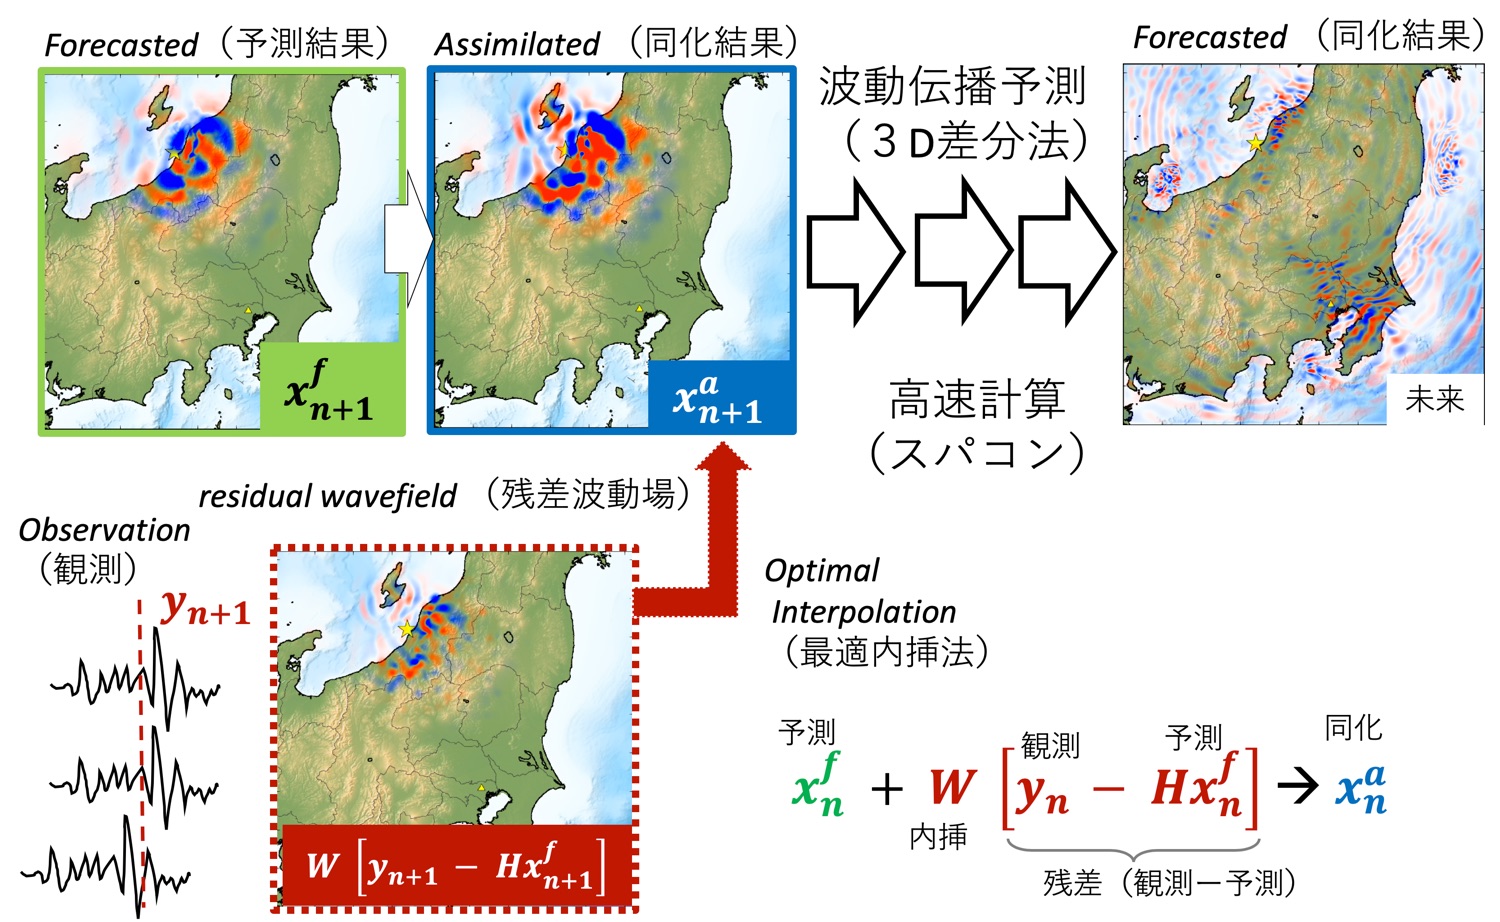 Real-time forecast of long-period ground motions based on data assimilation of seismic observation and computer simulation